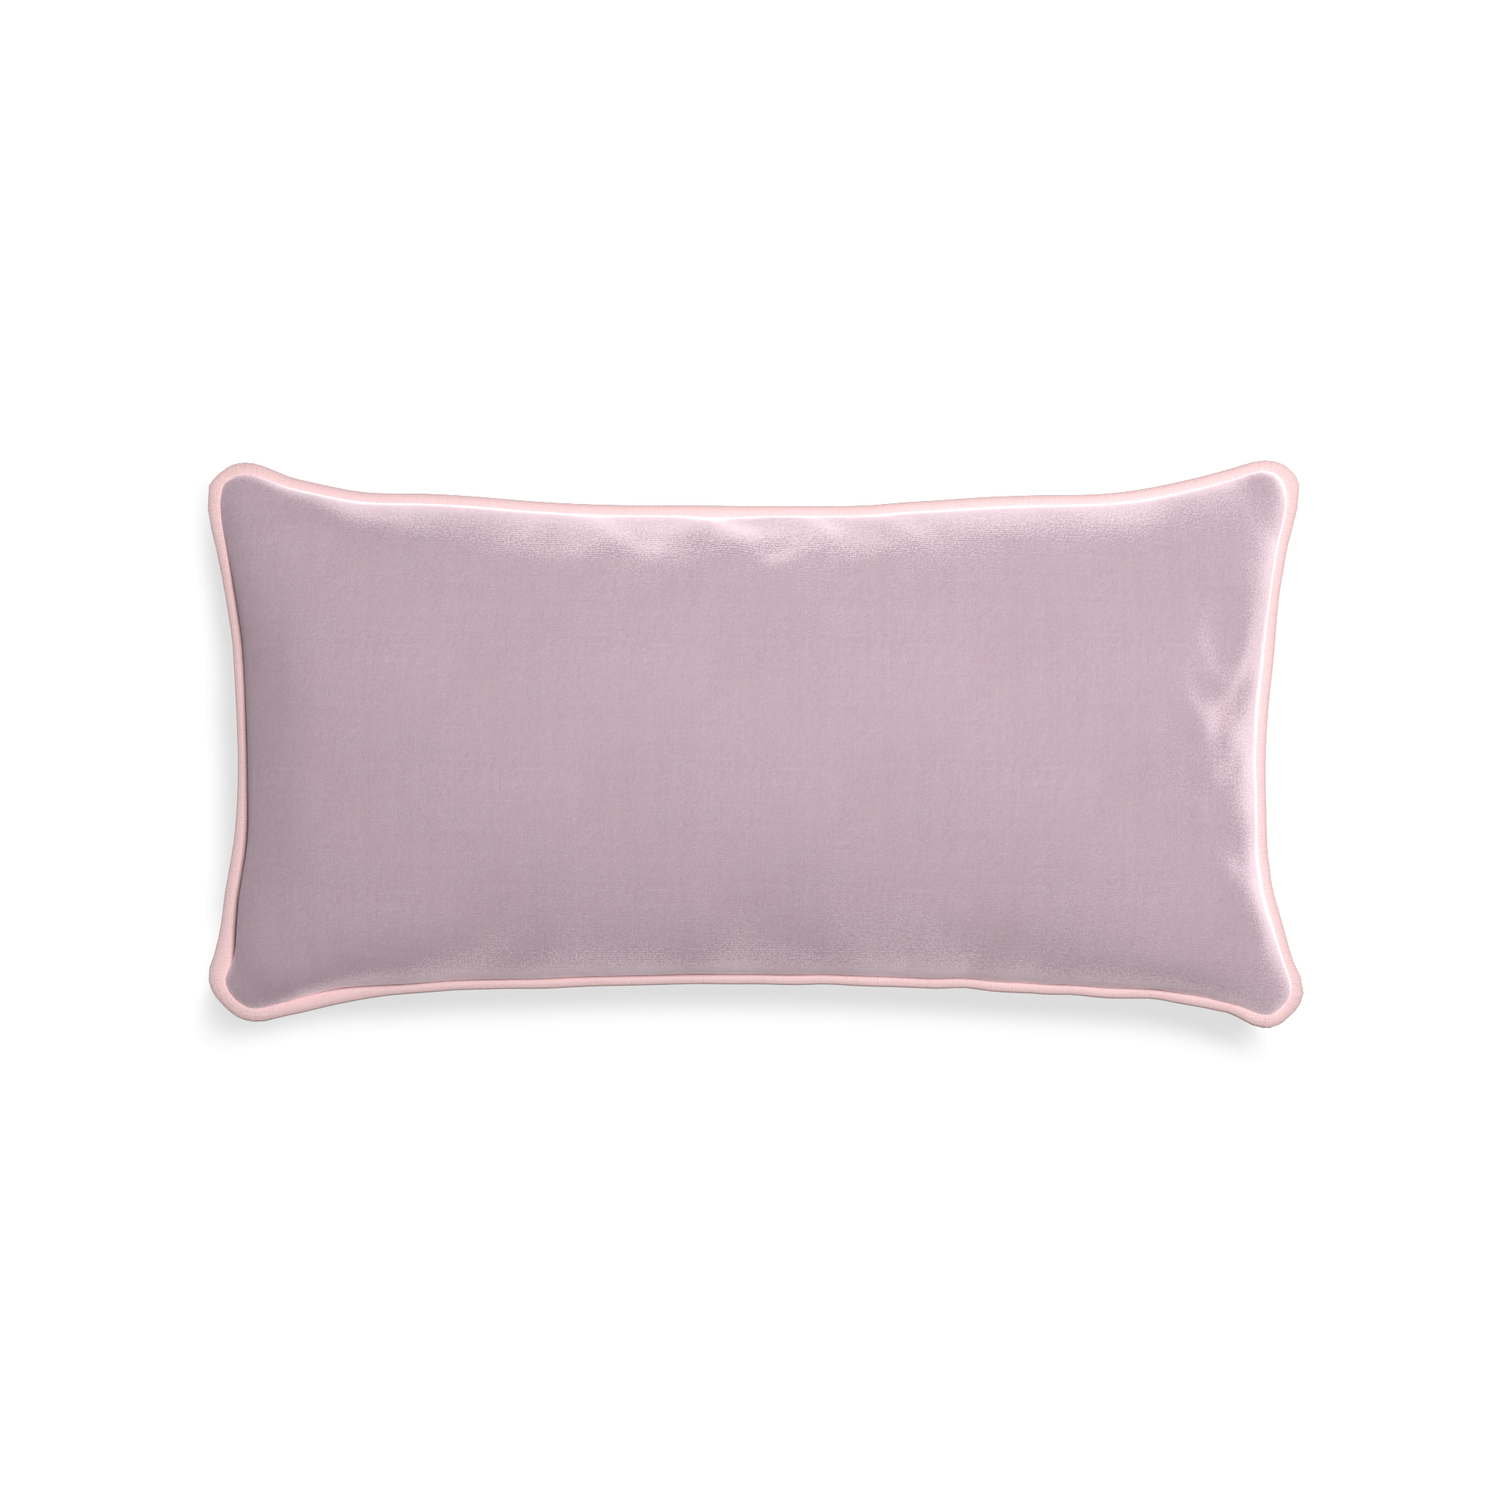 Midi-lumbar lilac velvet custom lilacpillow with petal piping on white background